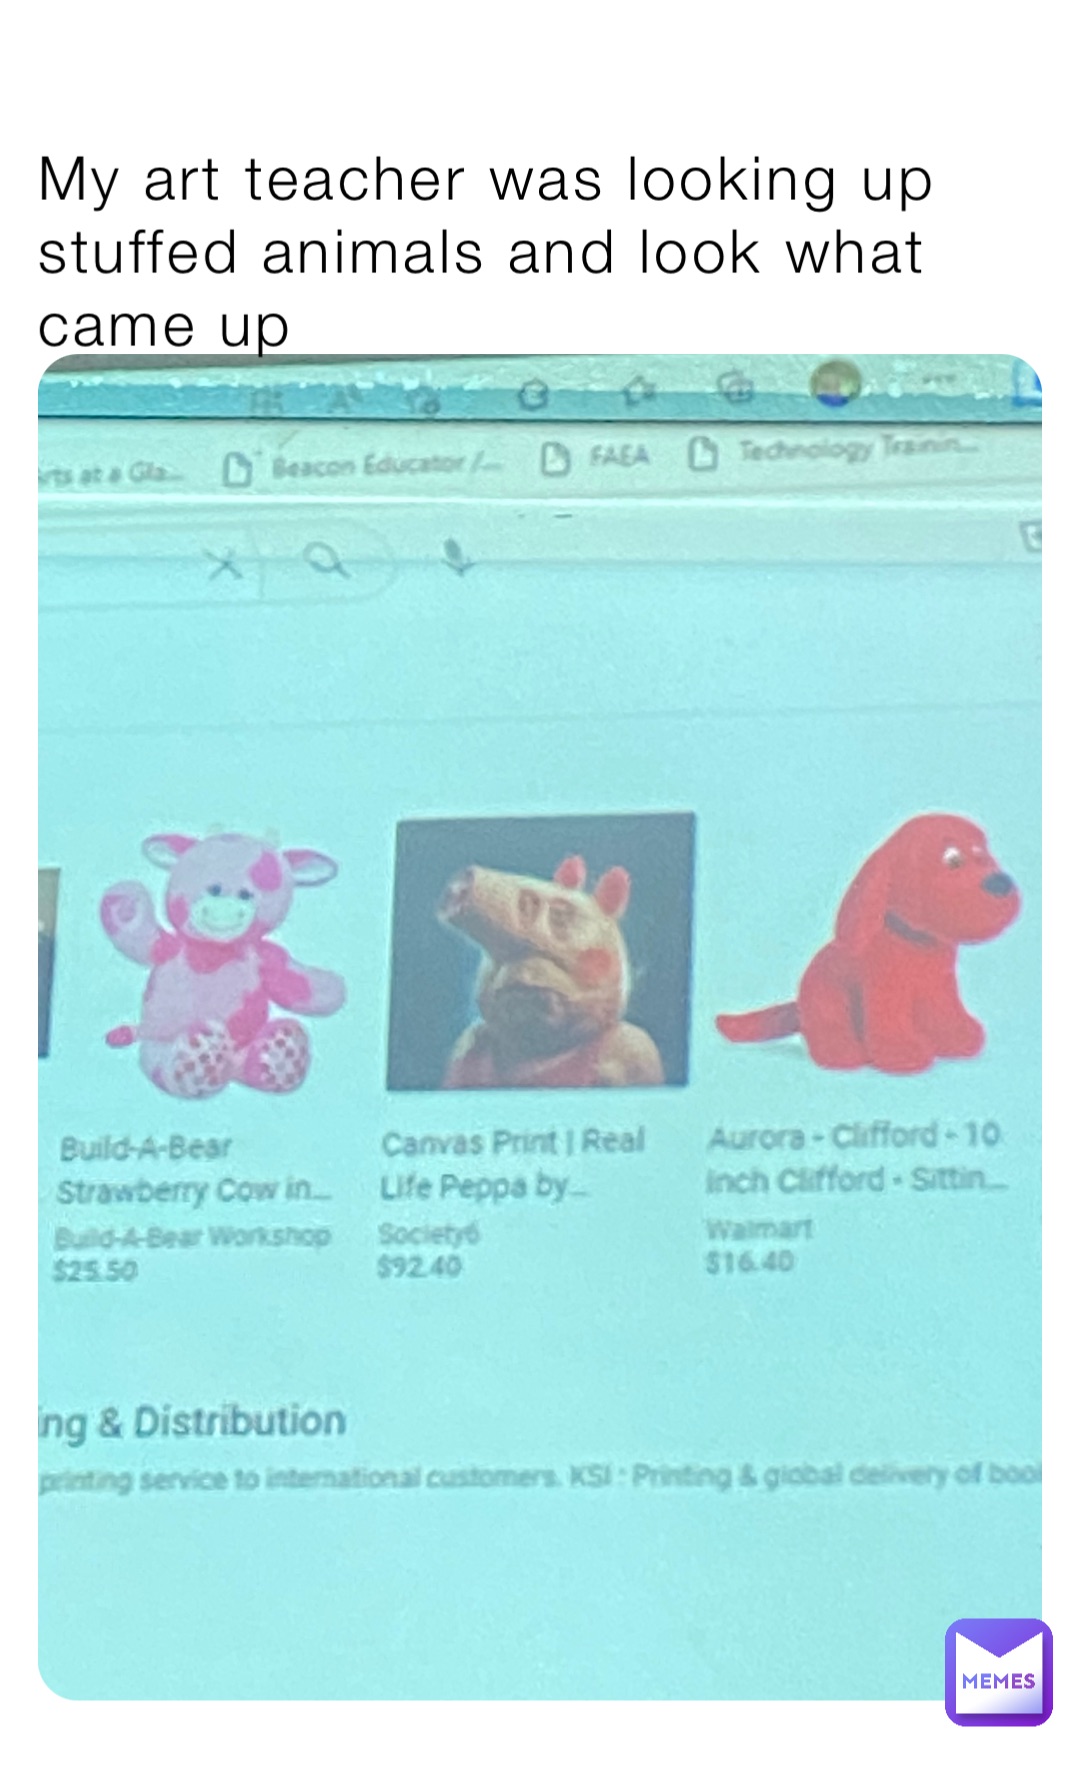 My art teacher was looking up stuffed animals and look what came up